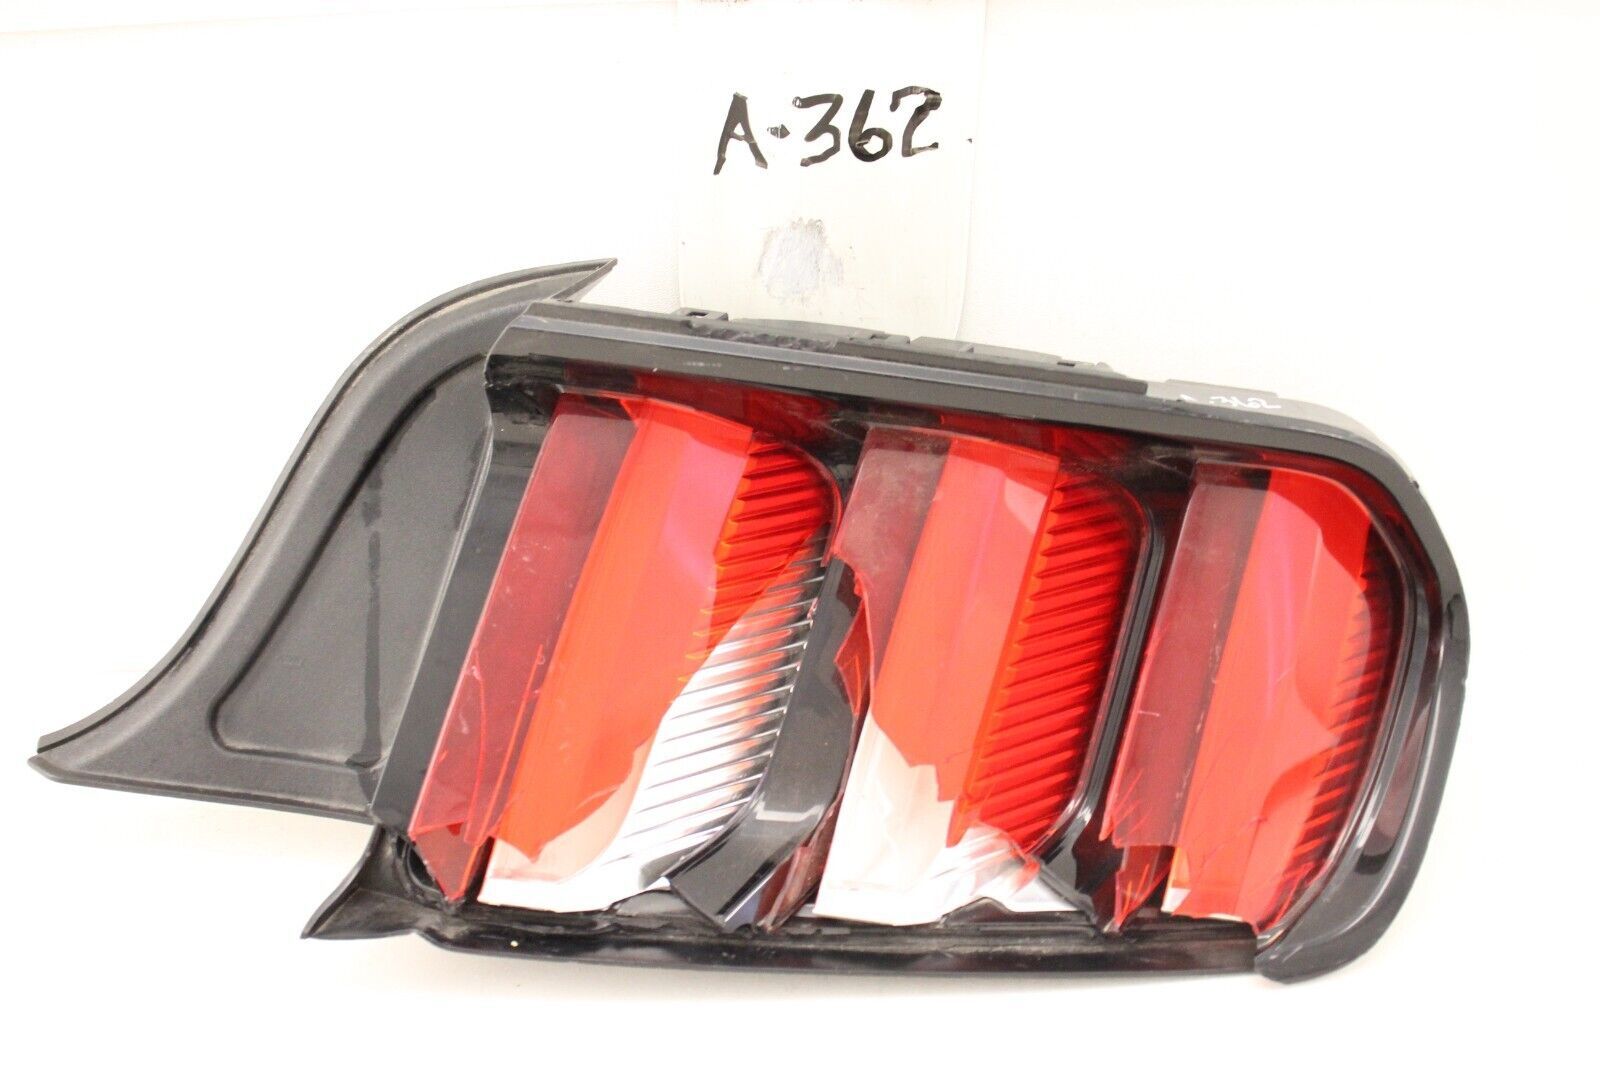 Primary image for Used OEM Ford Mustang Taillight Tail Light Lamp 2015-2017 damaged lens, good LED